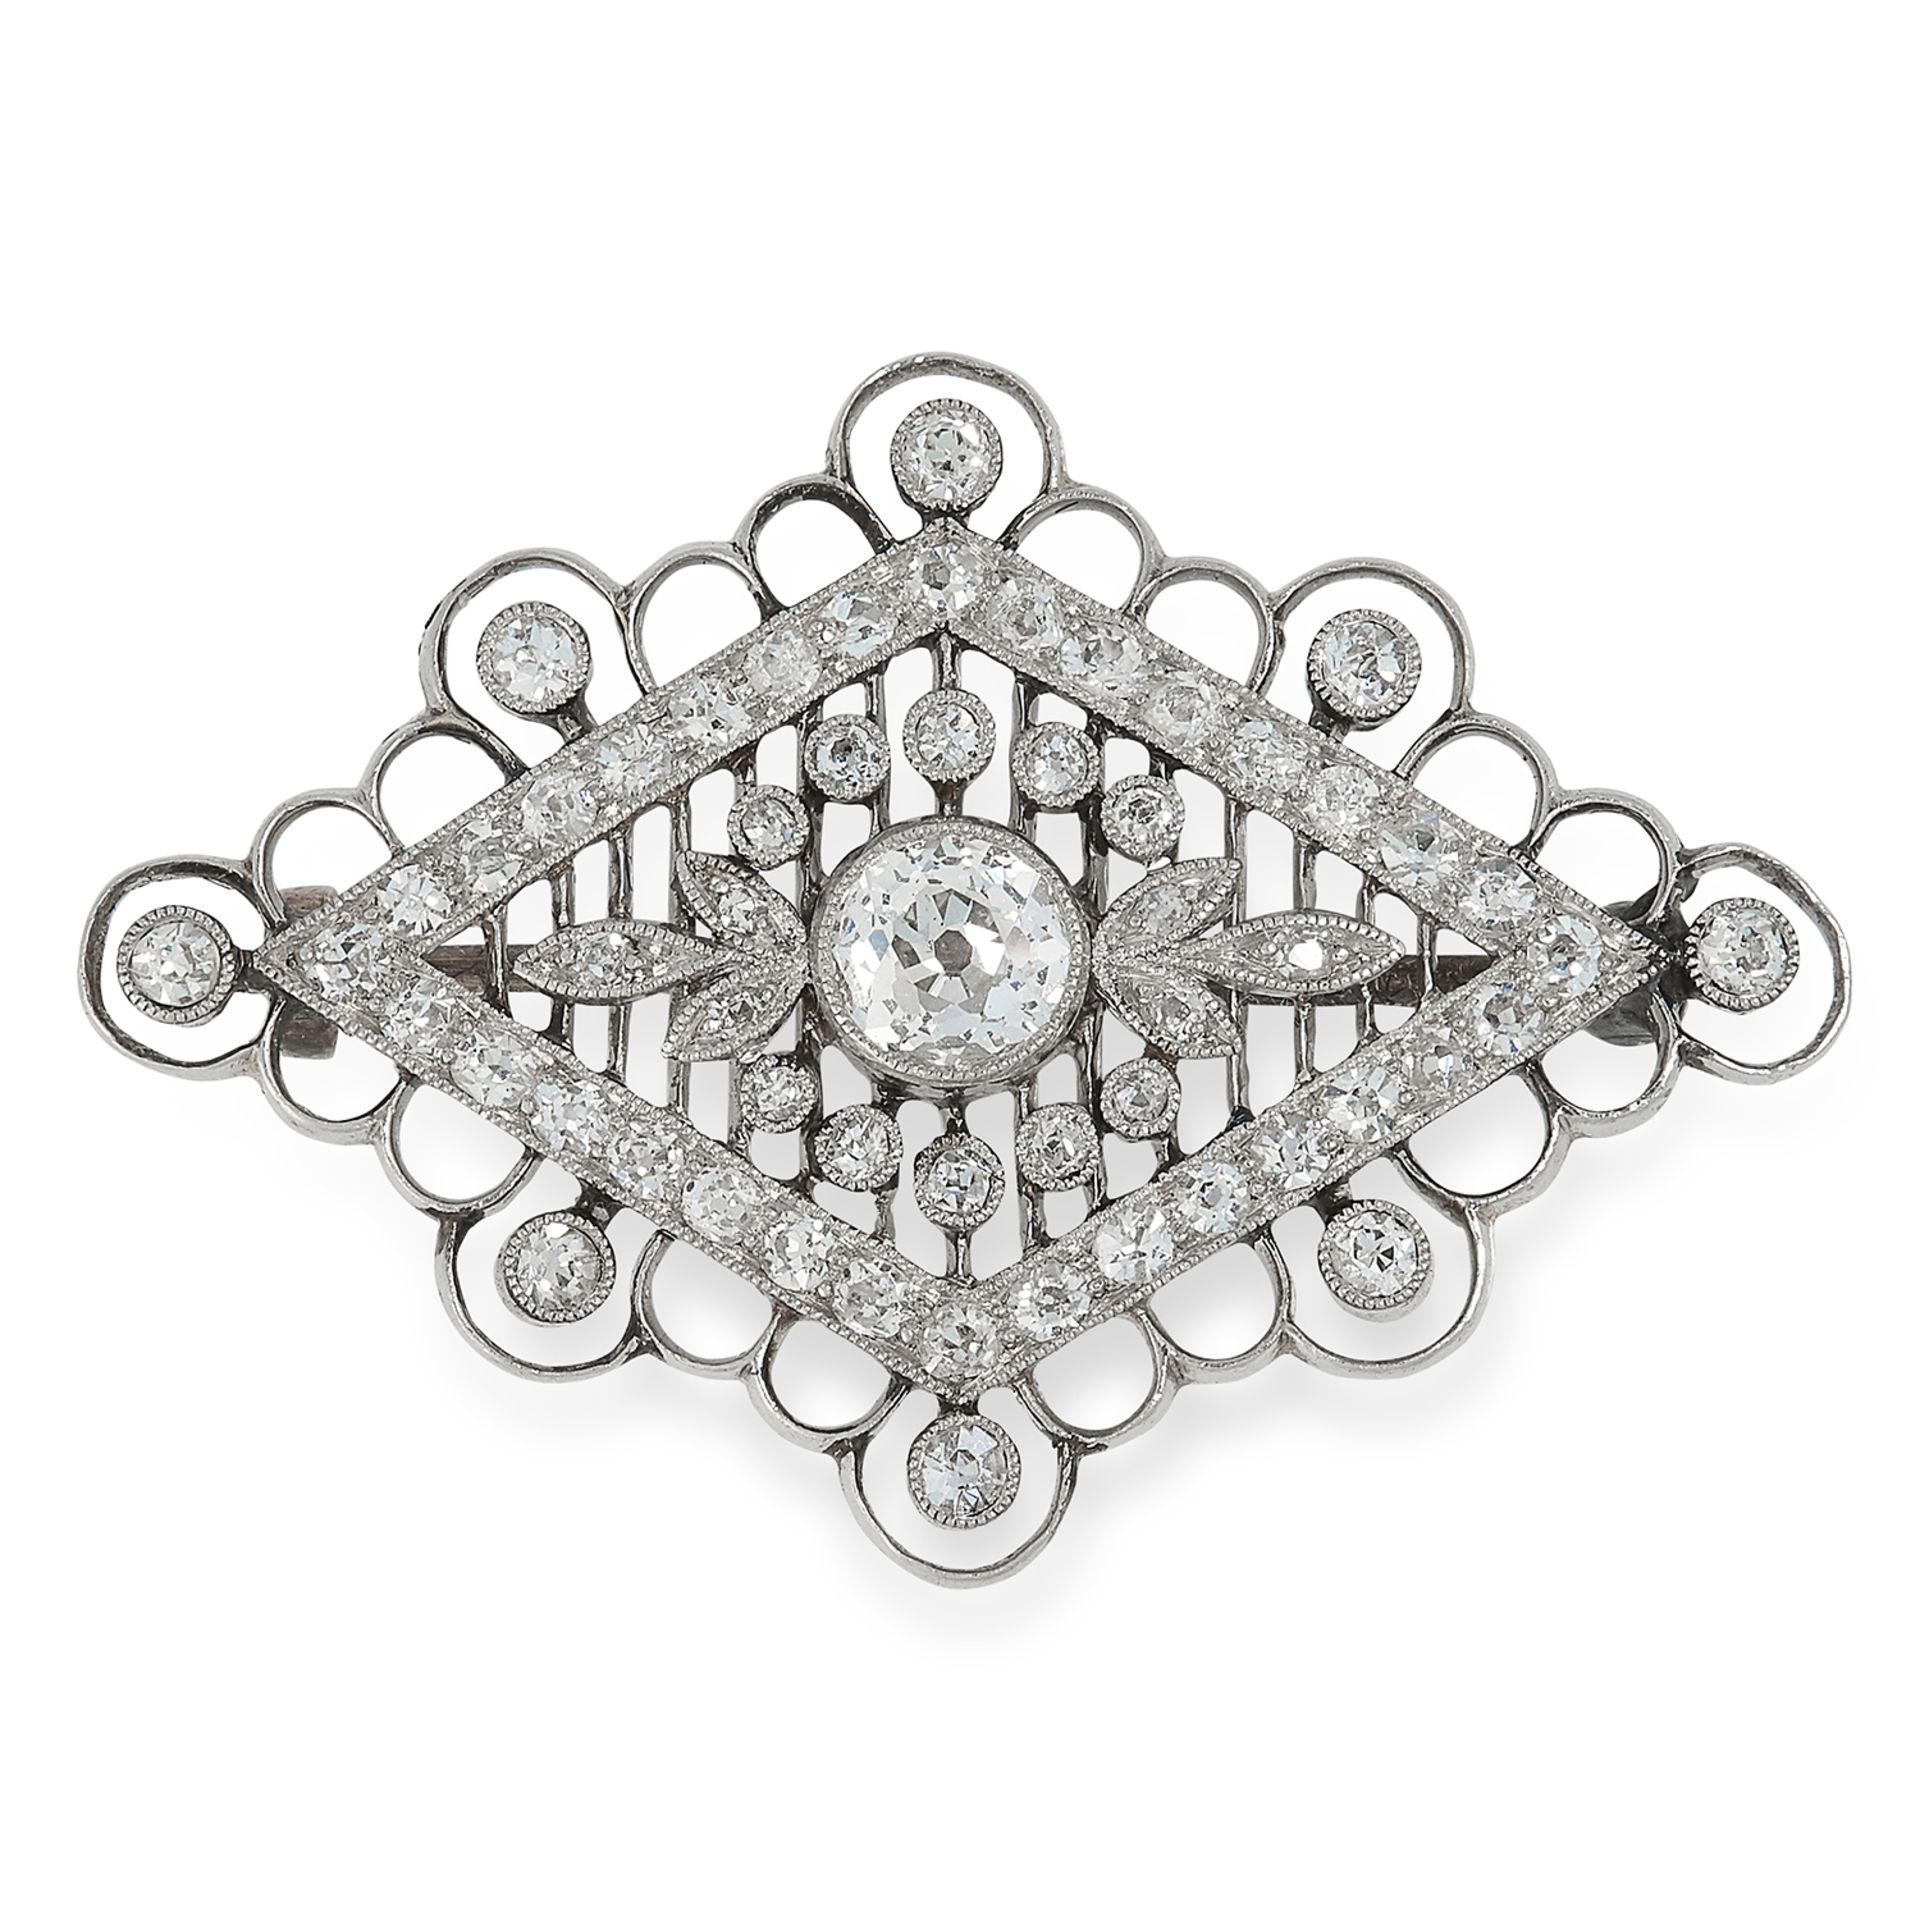 AN ANTIQUE DIAMOND BROOCH of diamond shape, set with old and rose cut diamonds totalling